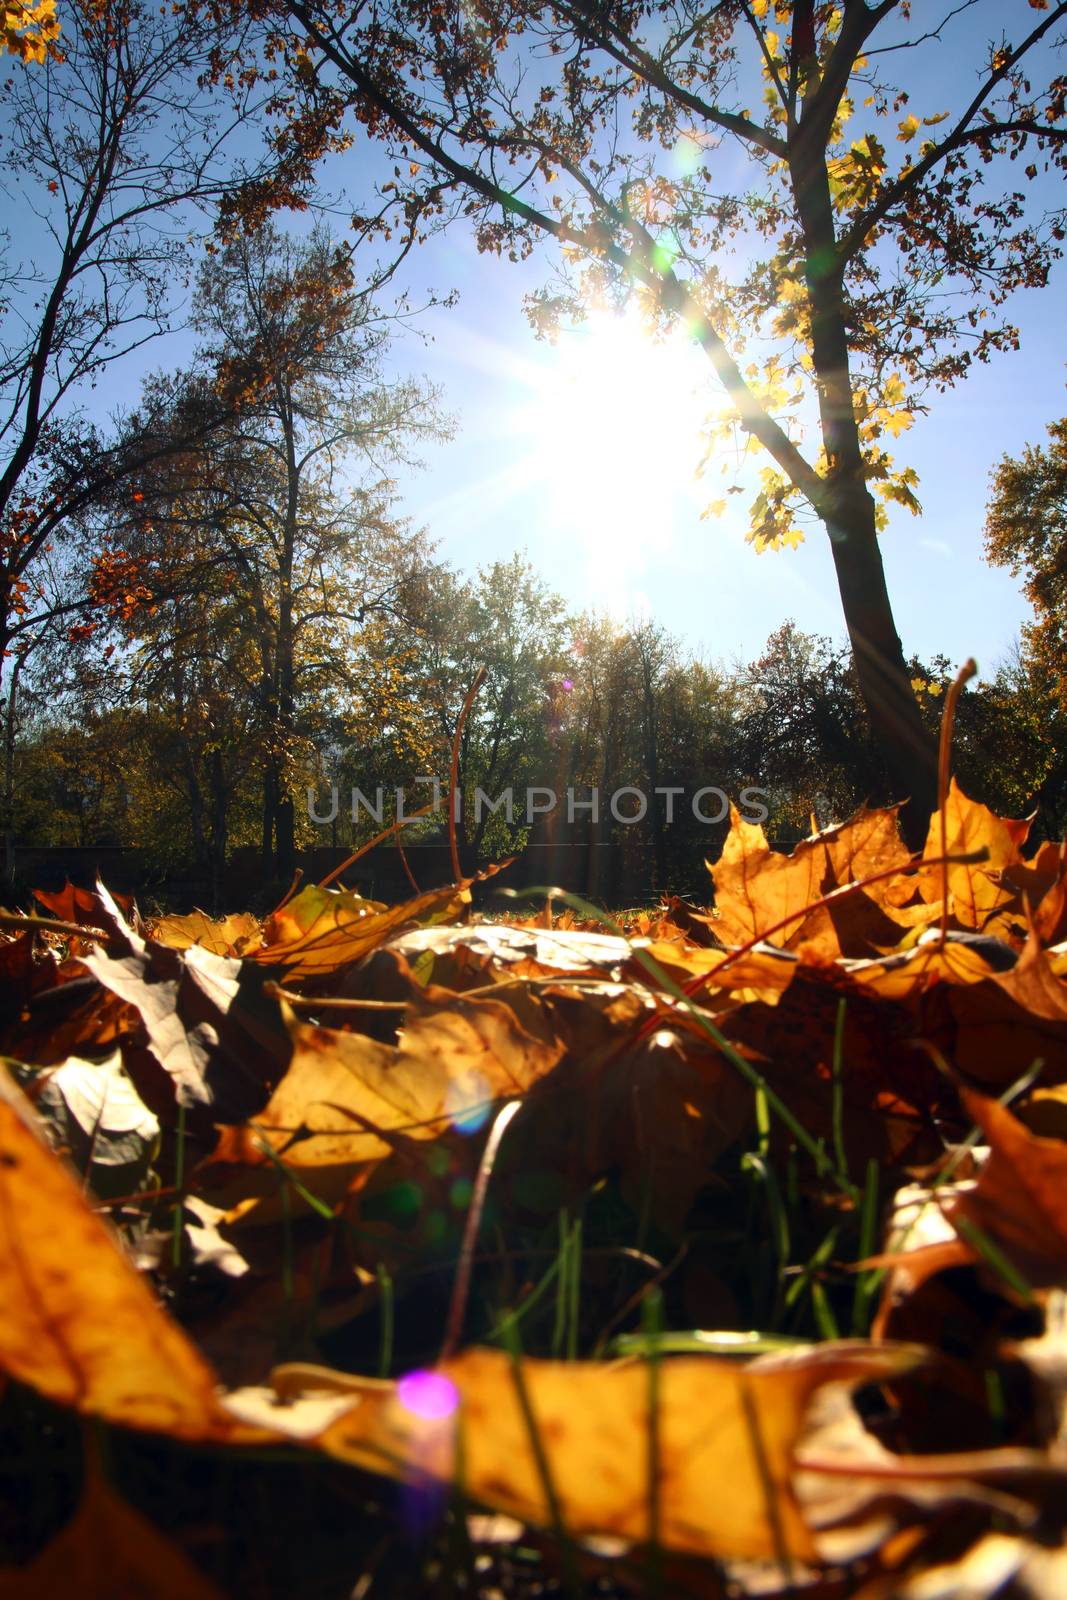 autumn leaves on ground by alex_nako